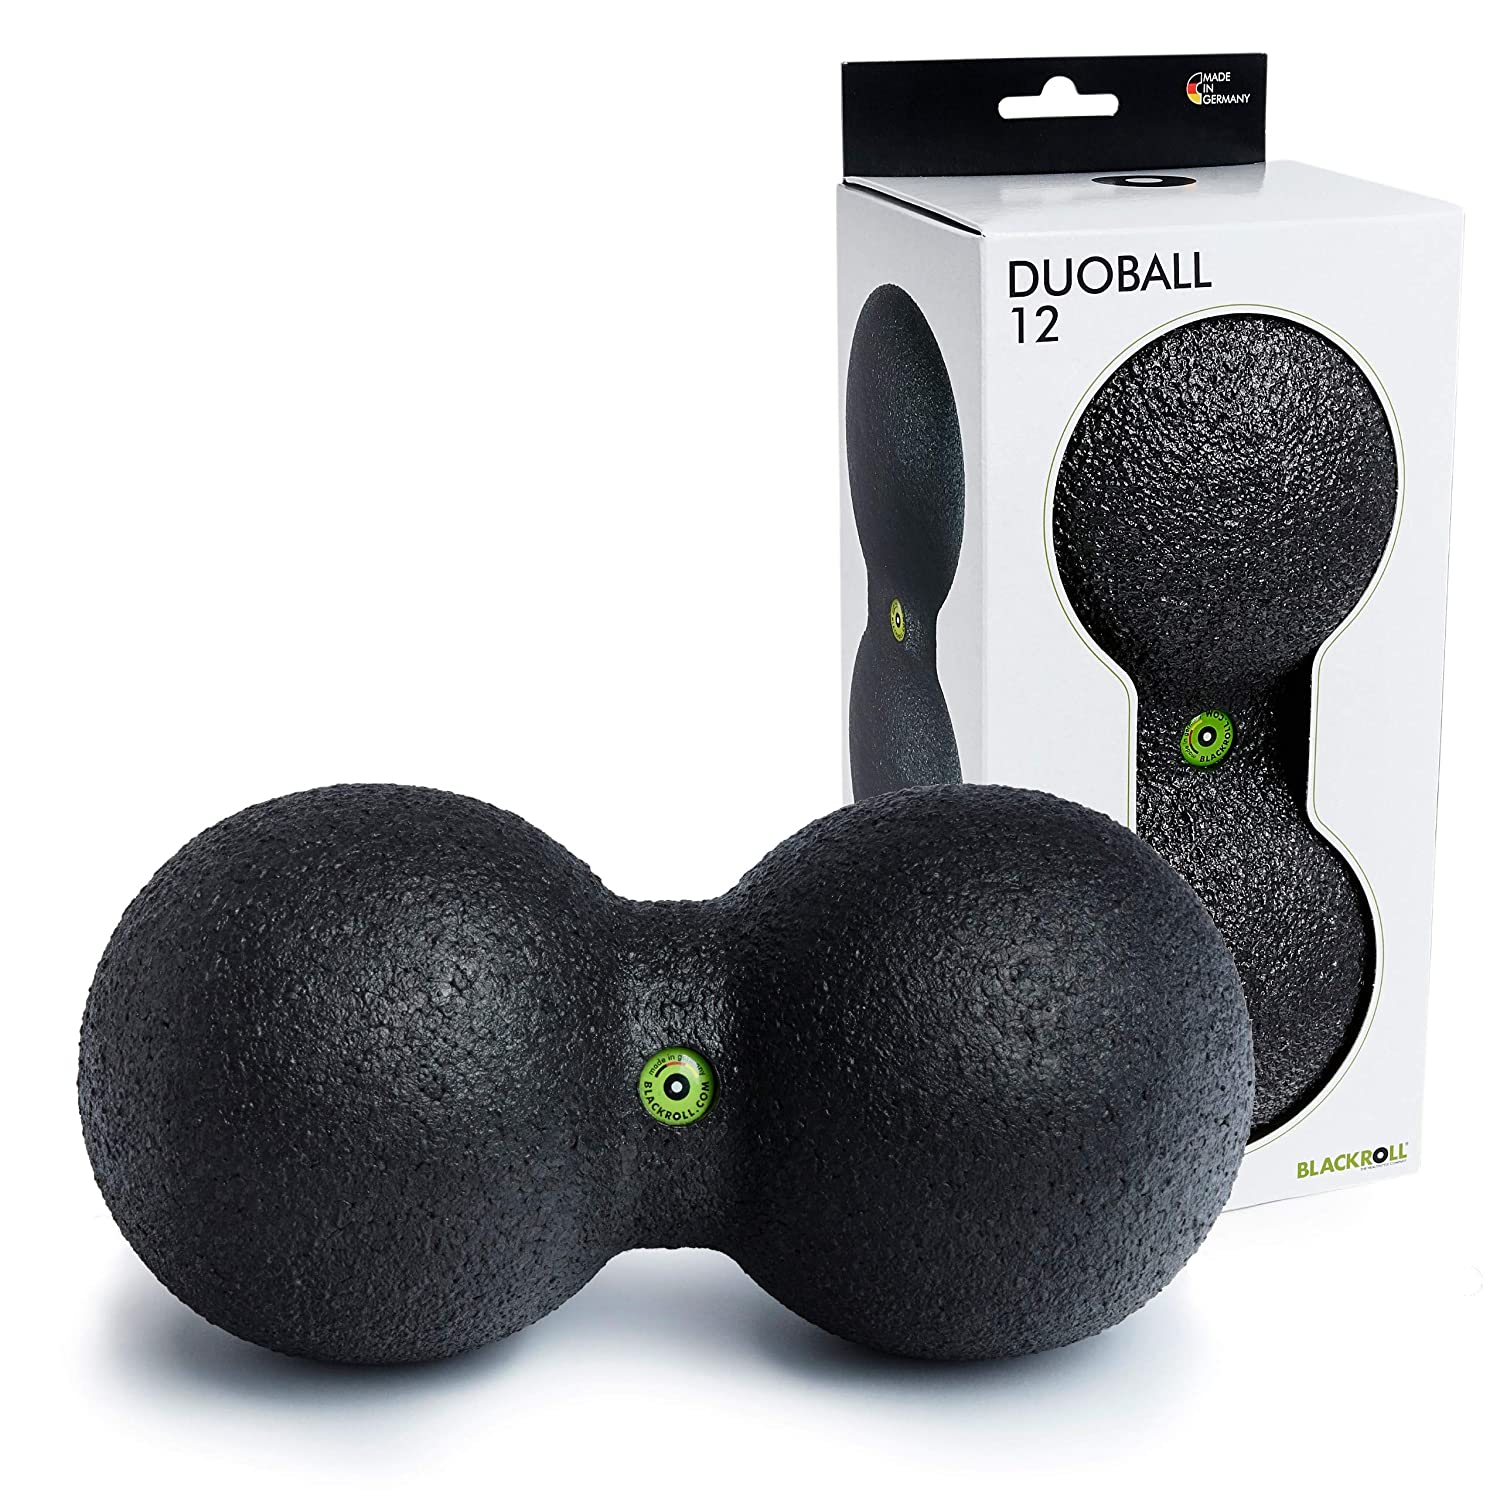 Blackroll - Trigger Point Ball 08, for Exercise and Muscle Recovery, Deep  Tissue Massager for Myofascial Release in The Shoulders, Neck, and Back,  8cm